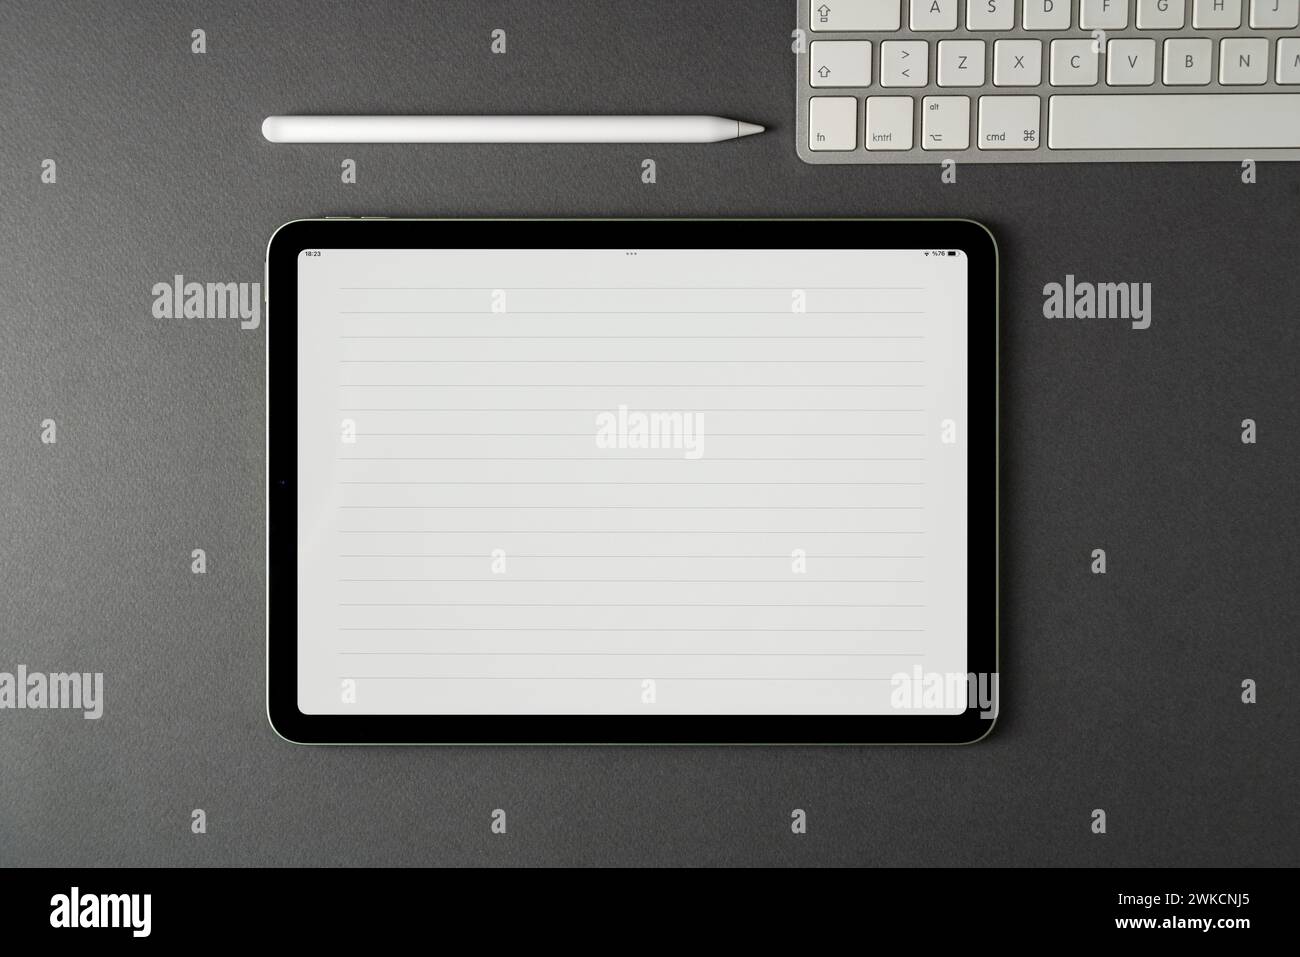 Tablet with lined notepaper on the screen and a keyboard and stylus pen on a dark gray table Stock Photo